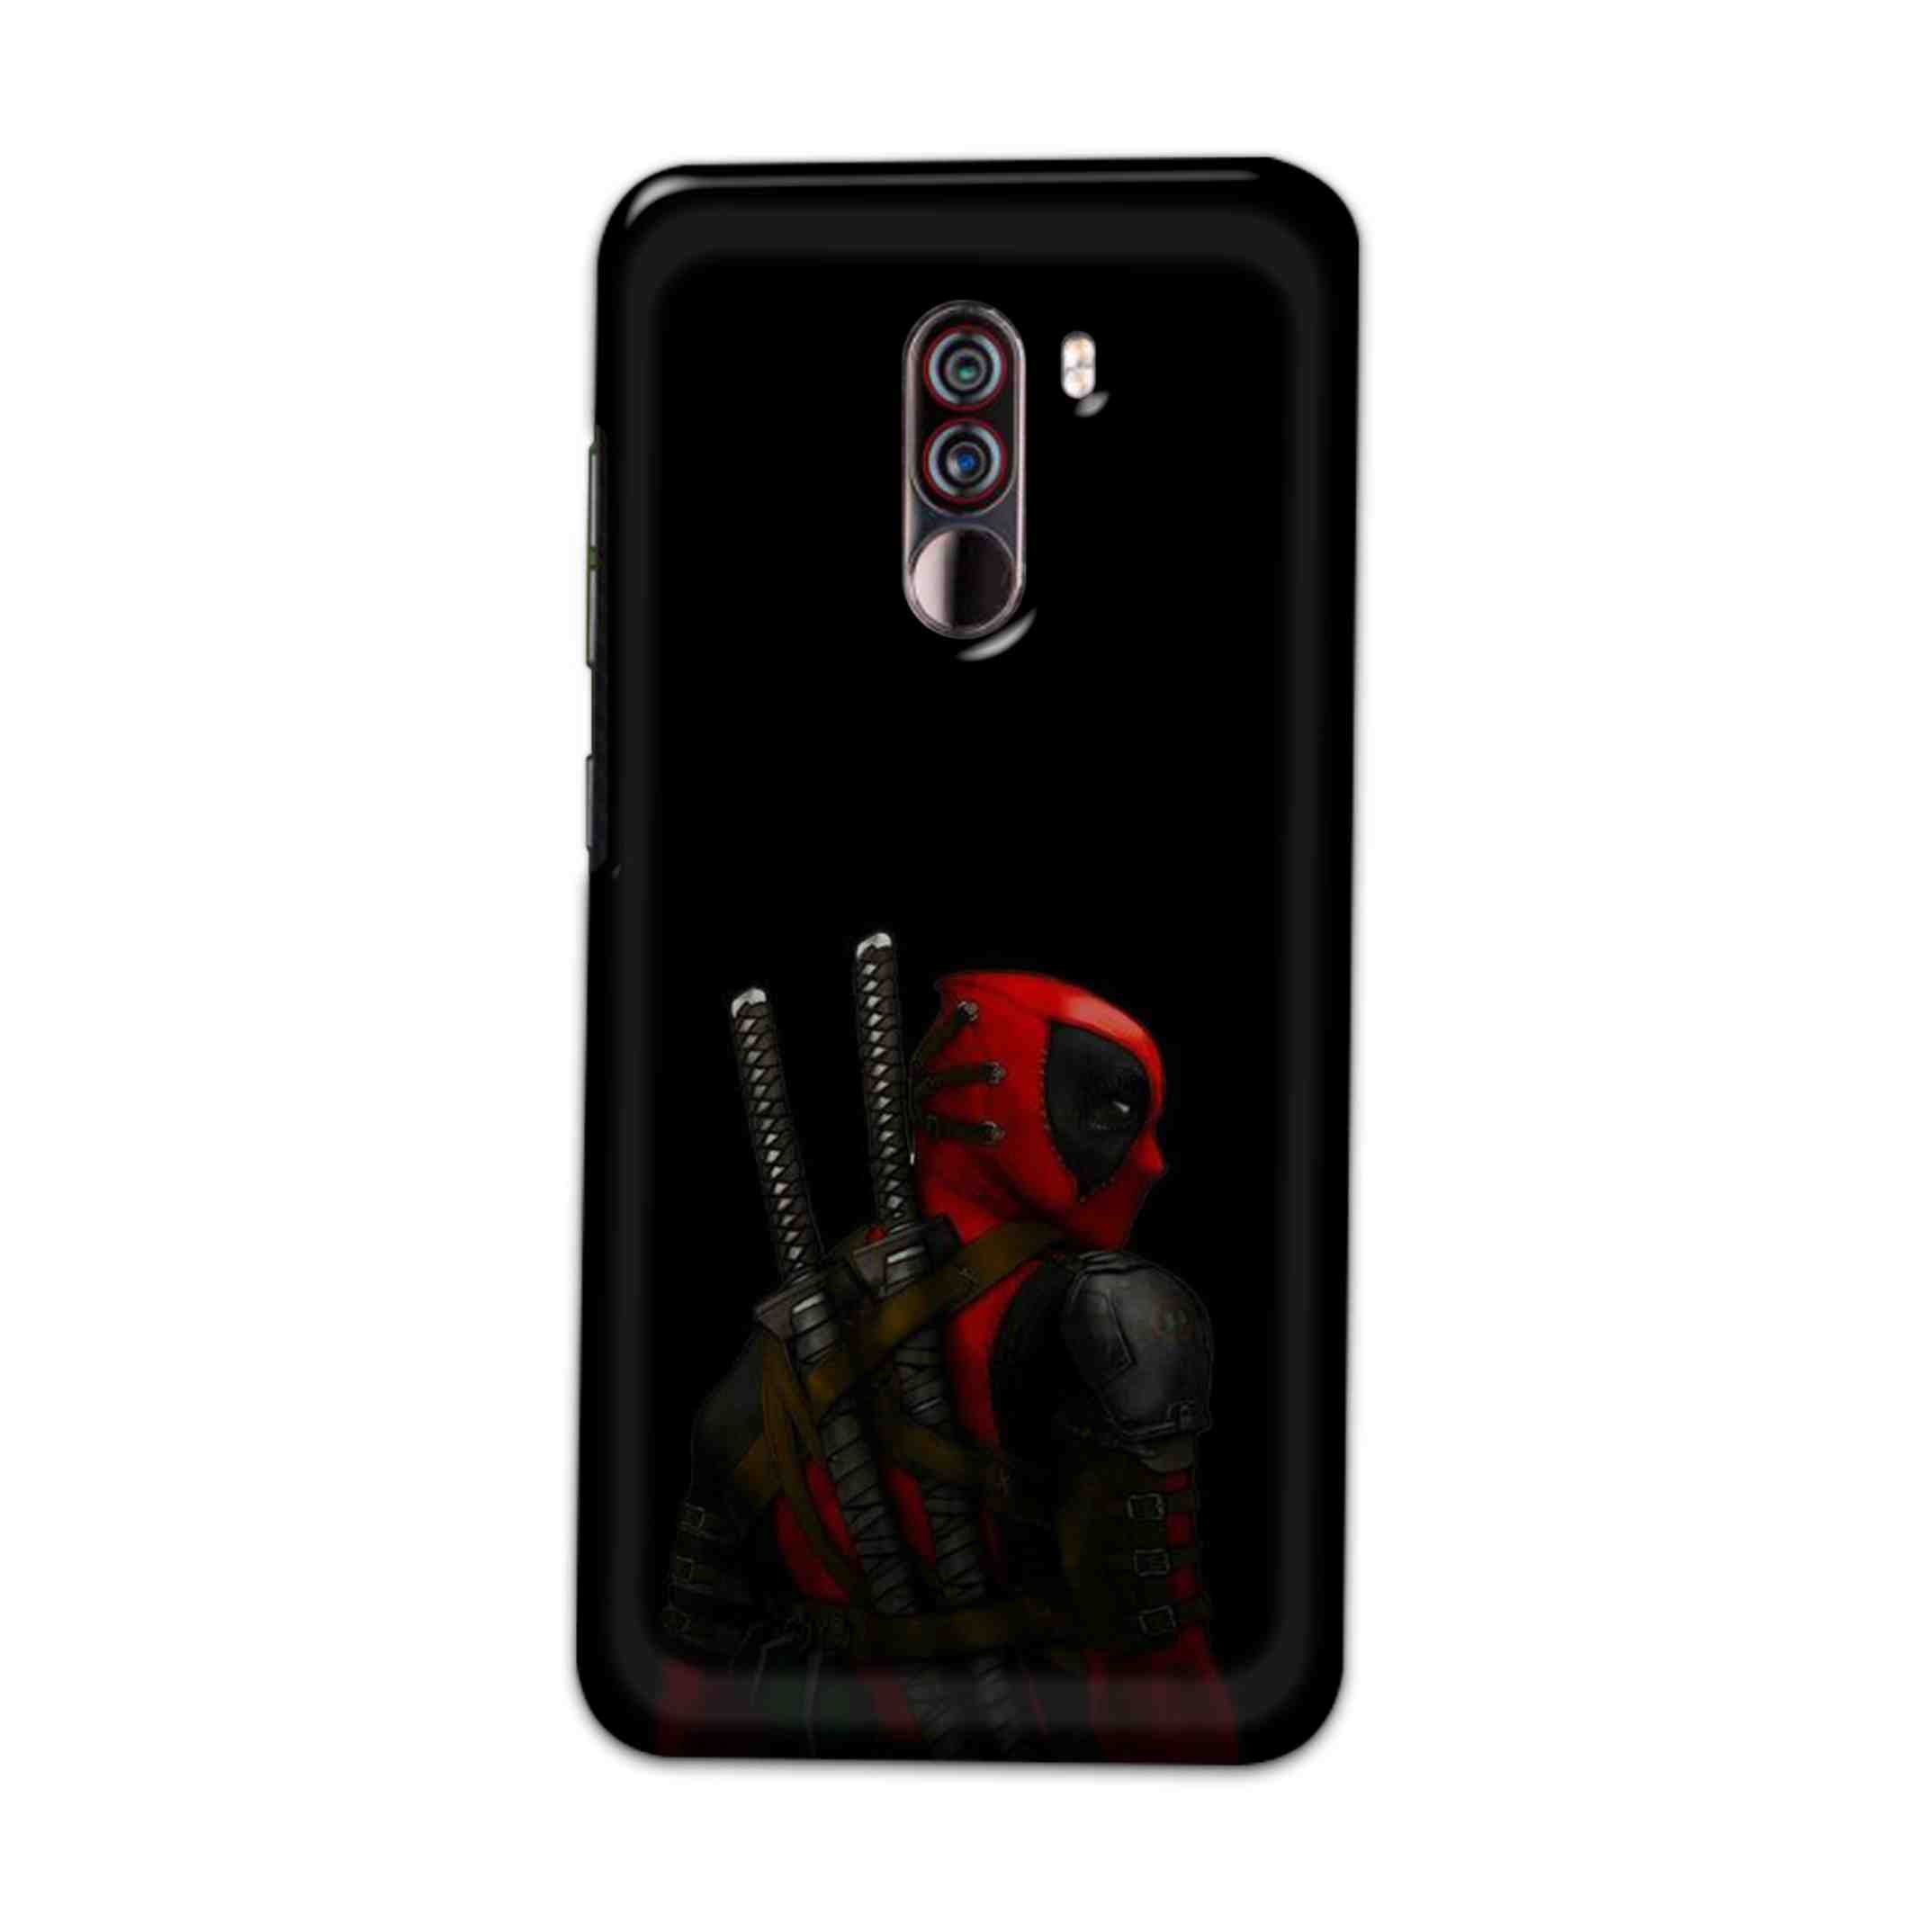 Buy Deadpool Hard Back Mobile Phone Case Cover For Xiaomi Pocophone F1 Online